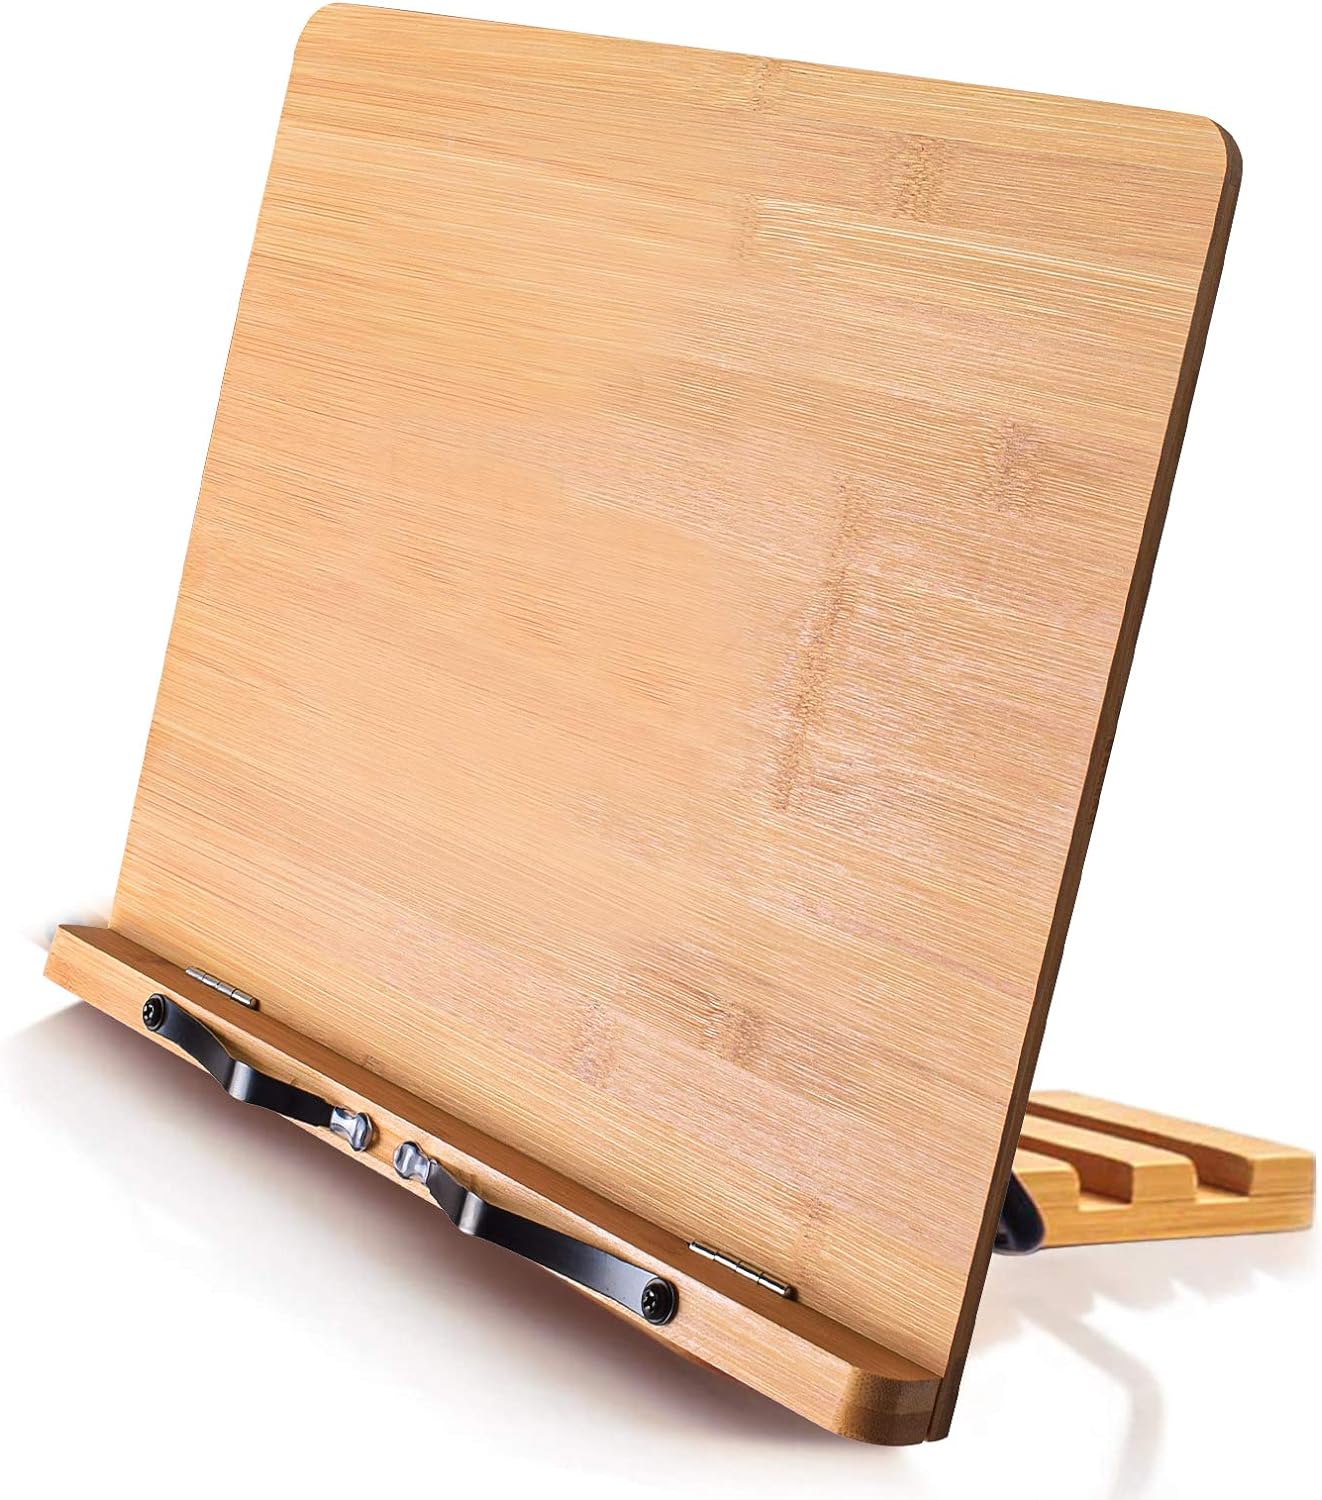 ✨ Flash Sale Alert: Save 20% on wishacc Bamboo Book Stand! Act Fast!